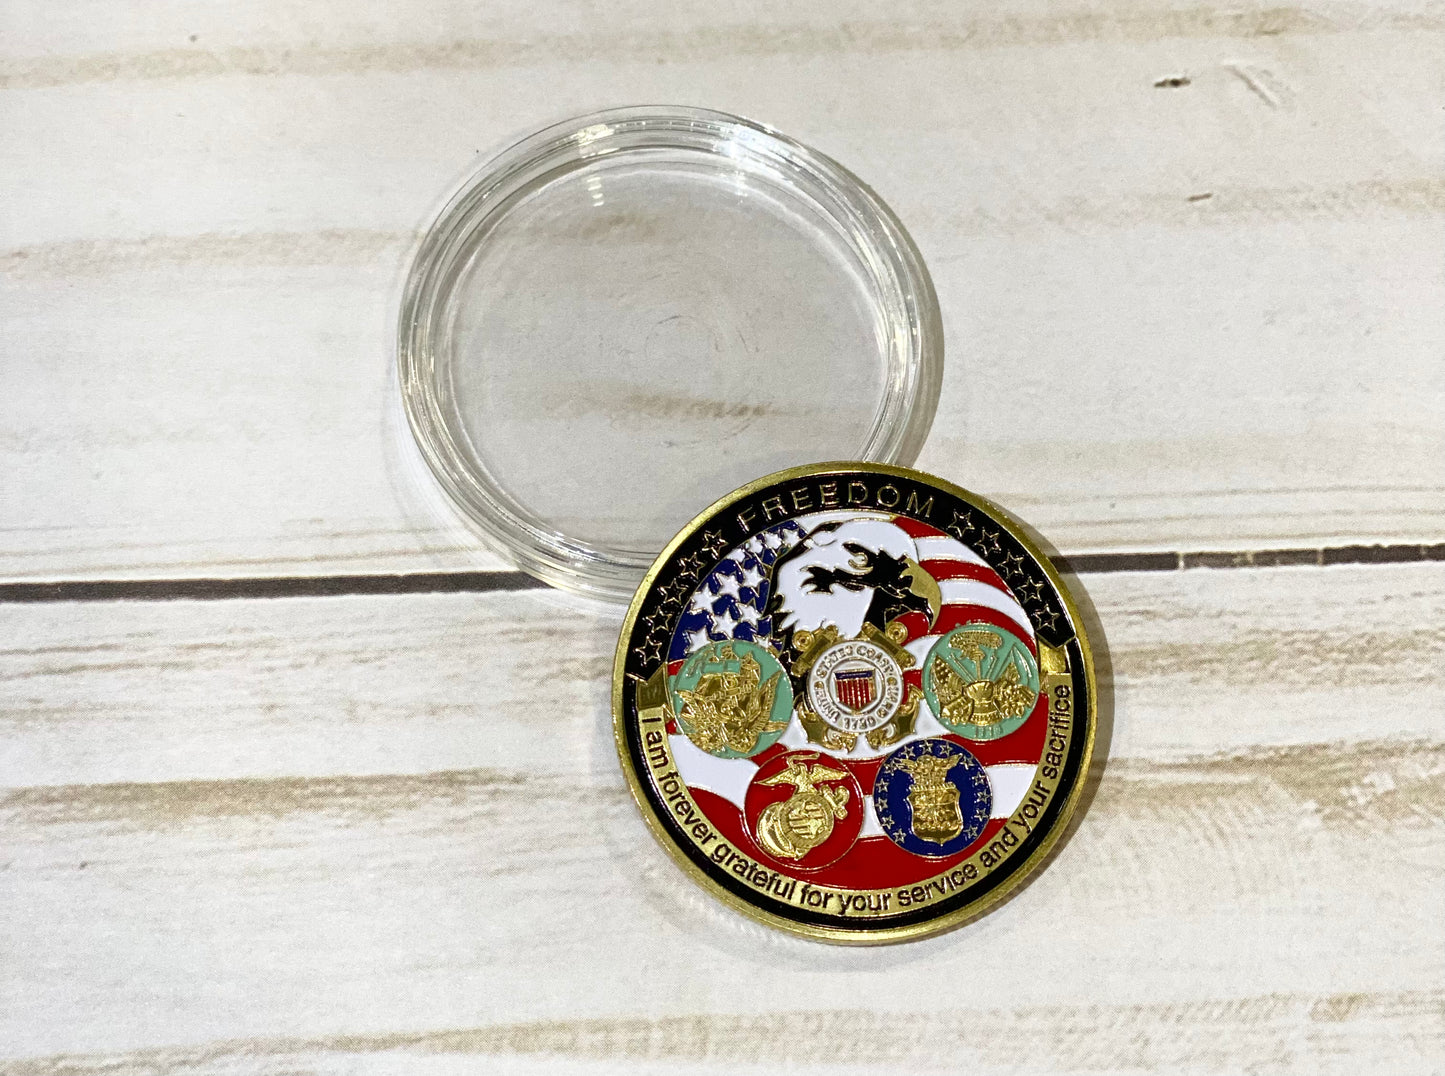 Salute to your Service - Military Thank You Note and Challenge Coin for Active Military